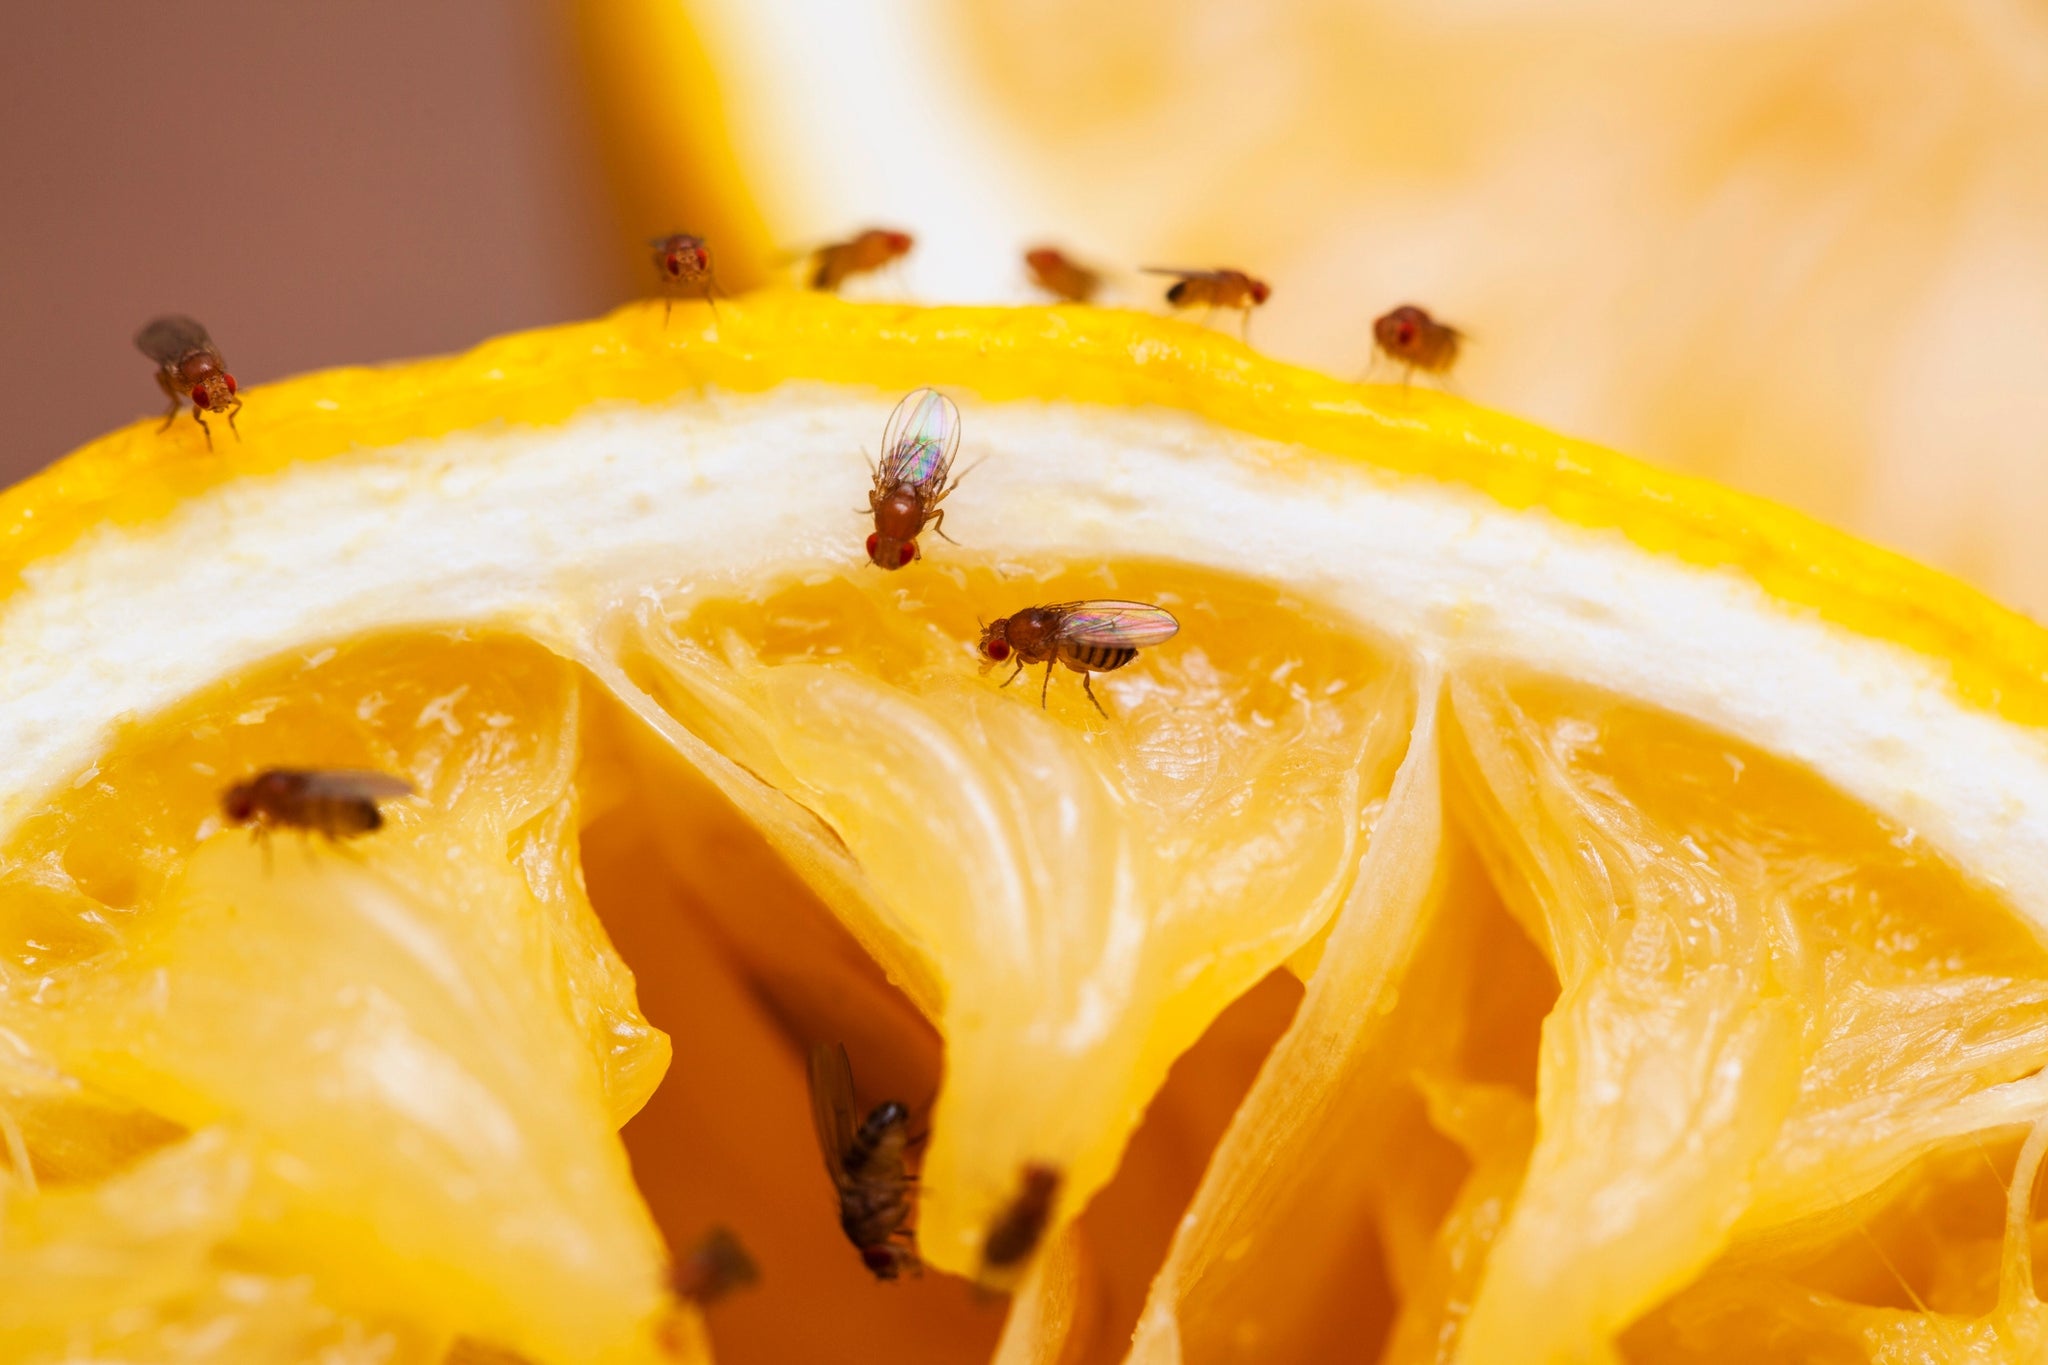 Flies In The Compost: Should I Have Flies In My Compost?